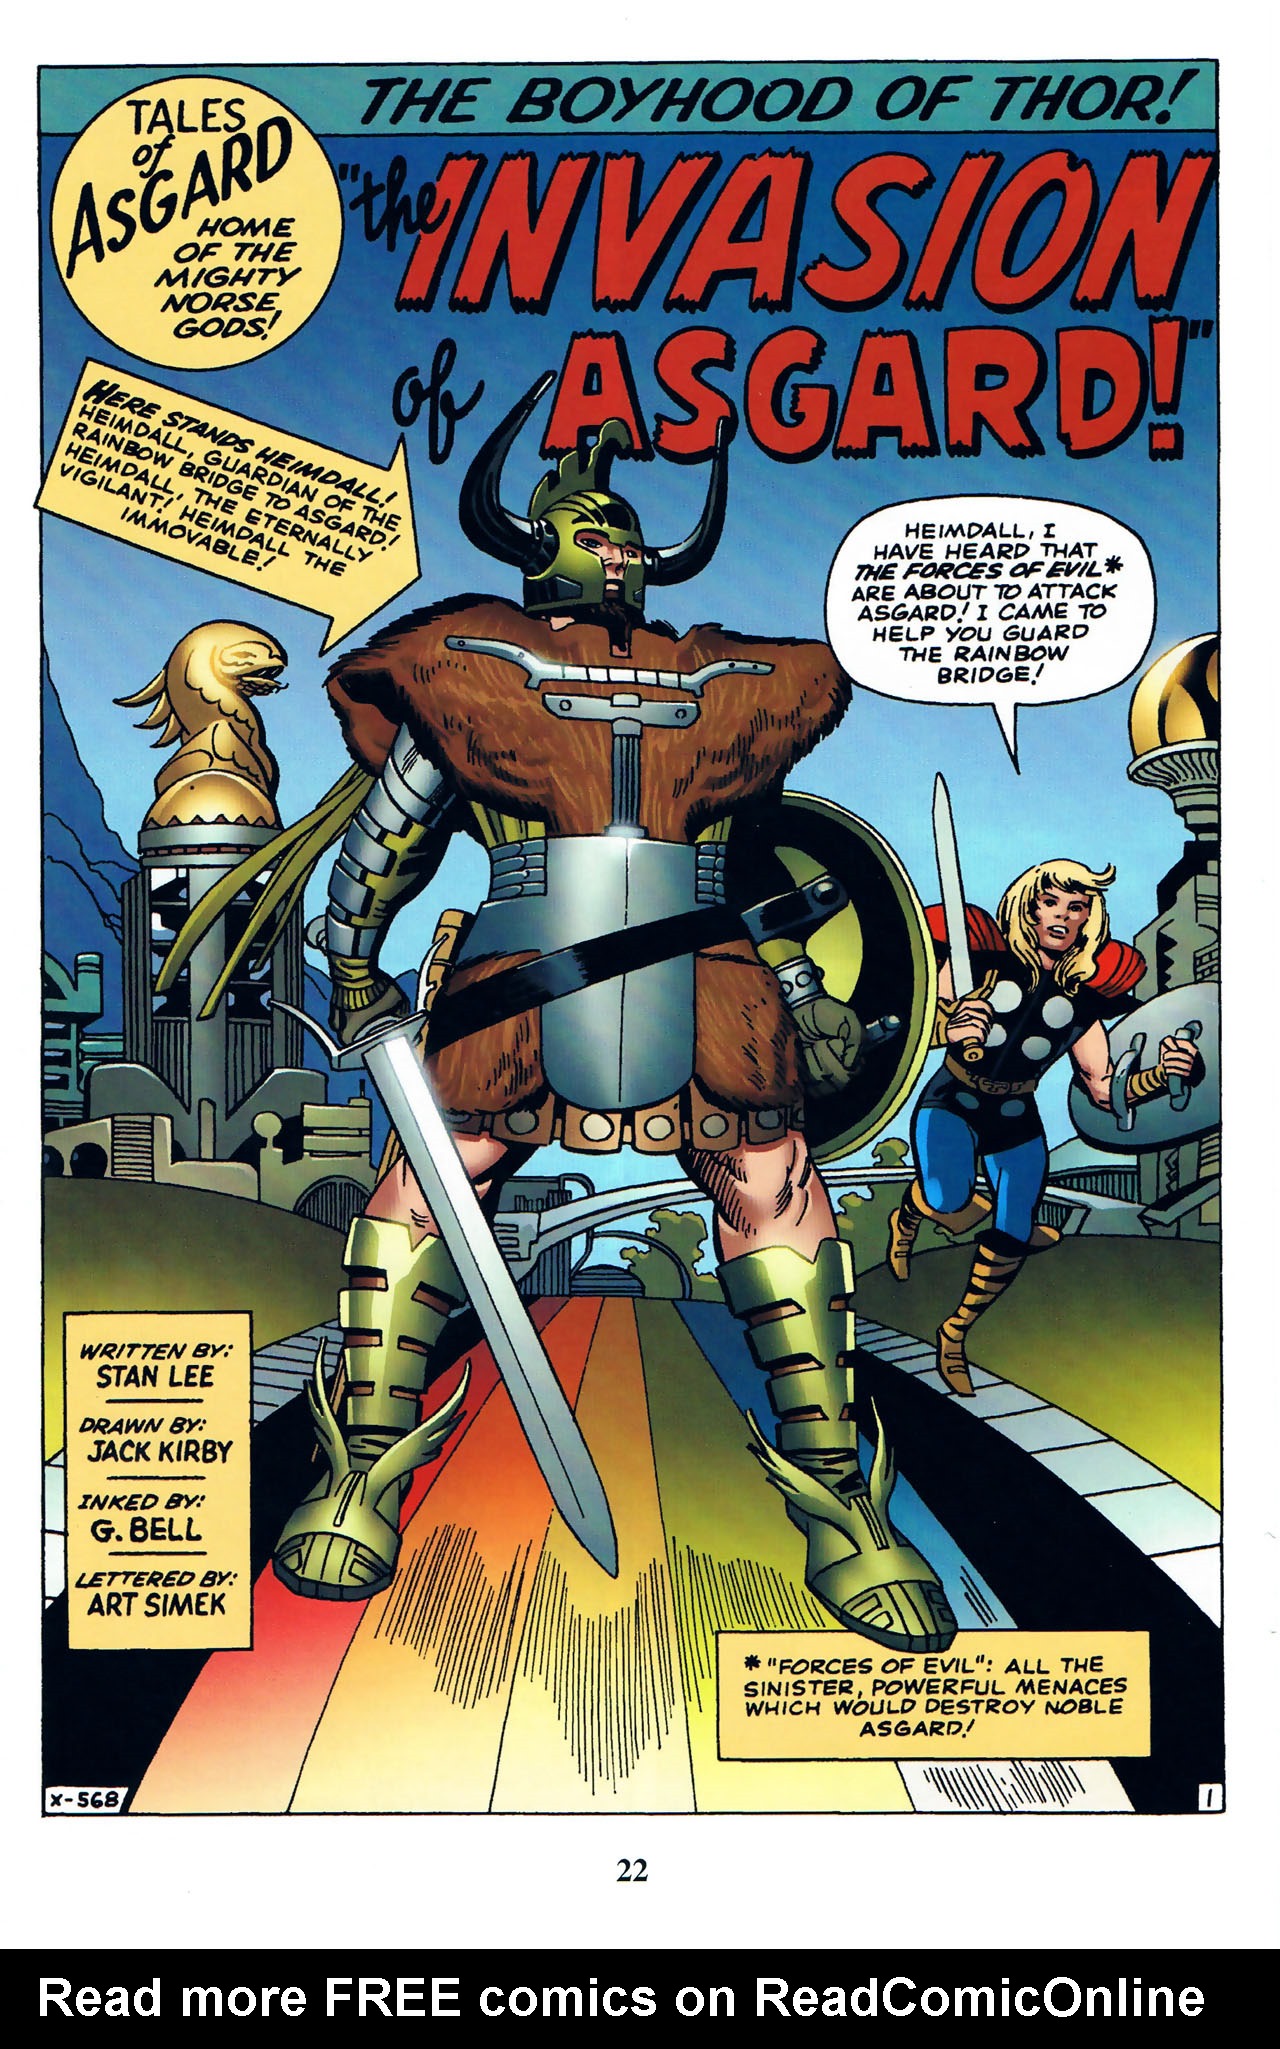 Read online Thor: Tales of Asgard by Stan Lee & Jack Kirby comic -  Issue #1 - 24